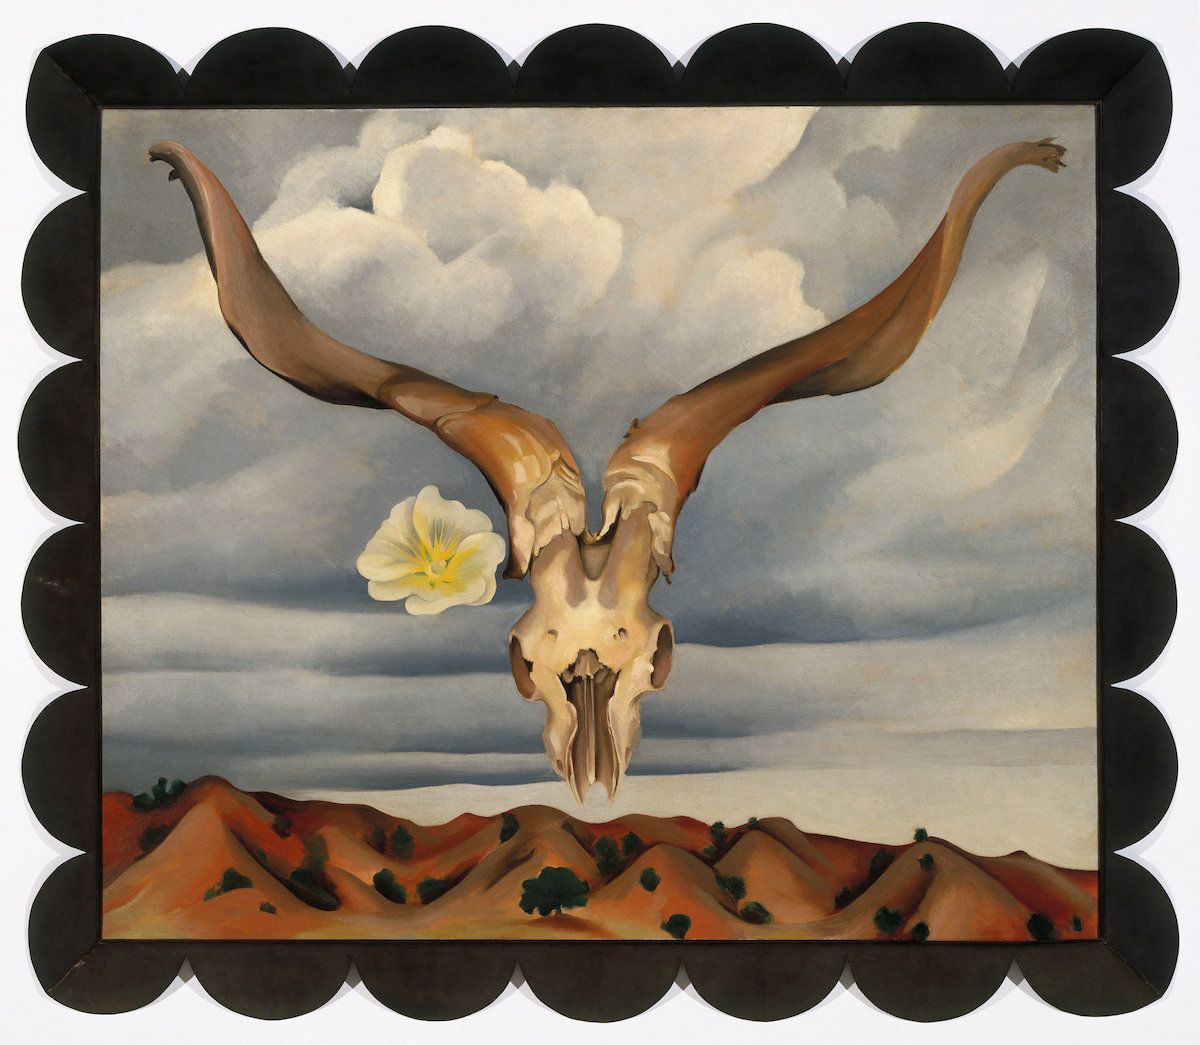 Georgia O’Keeffe, "Ram’s Head, White Hollyhock—Hills" (Ram’s Head and White Hollyhock, New Mexico), 1935, oil on canvas, 30 by 36 inches (76.2 by 91.4 centimeters).